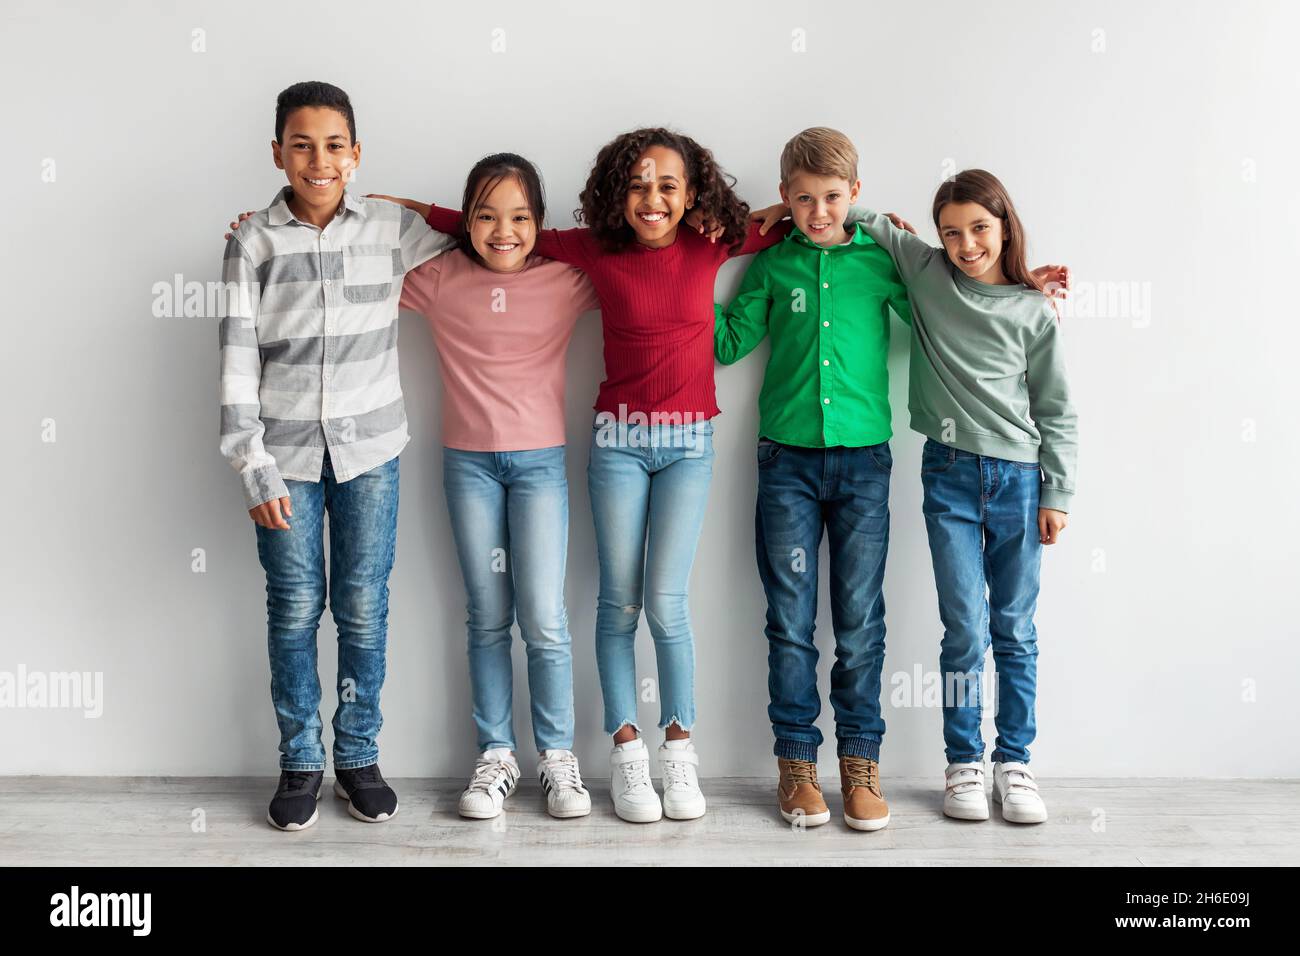 Group Of Happy Diverse Preteen Children Embracing Over Gray Background Stock Photo